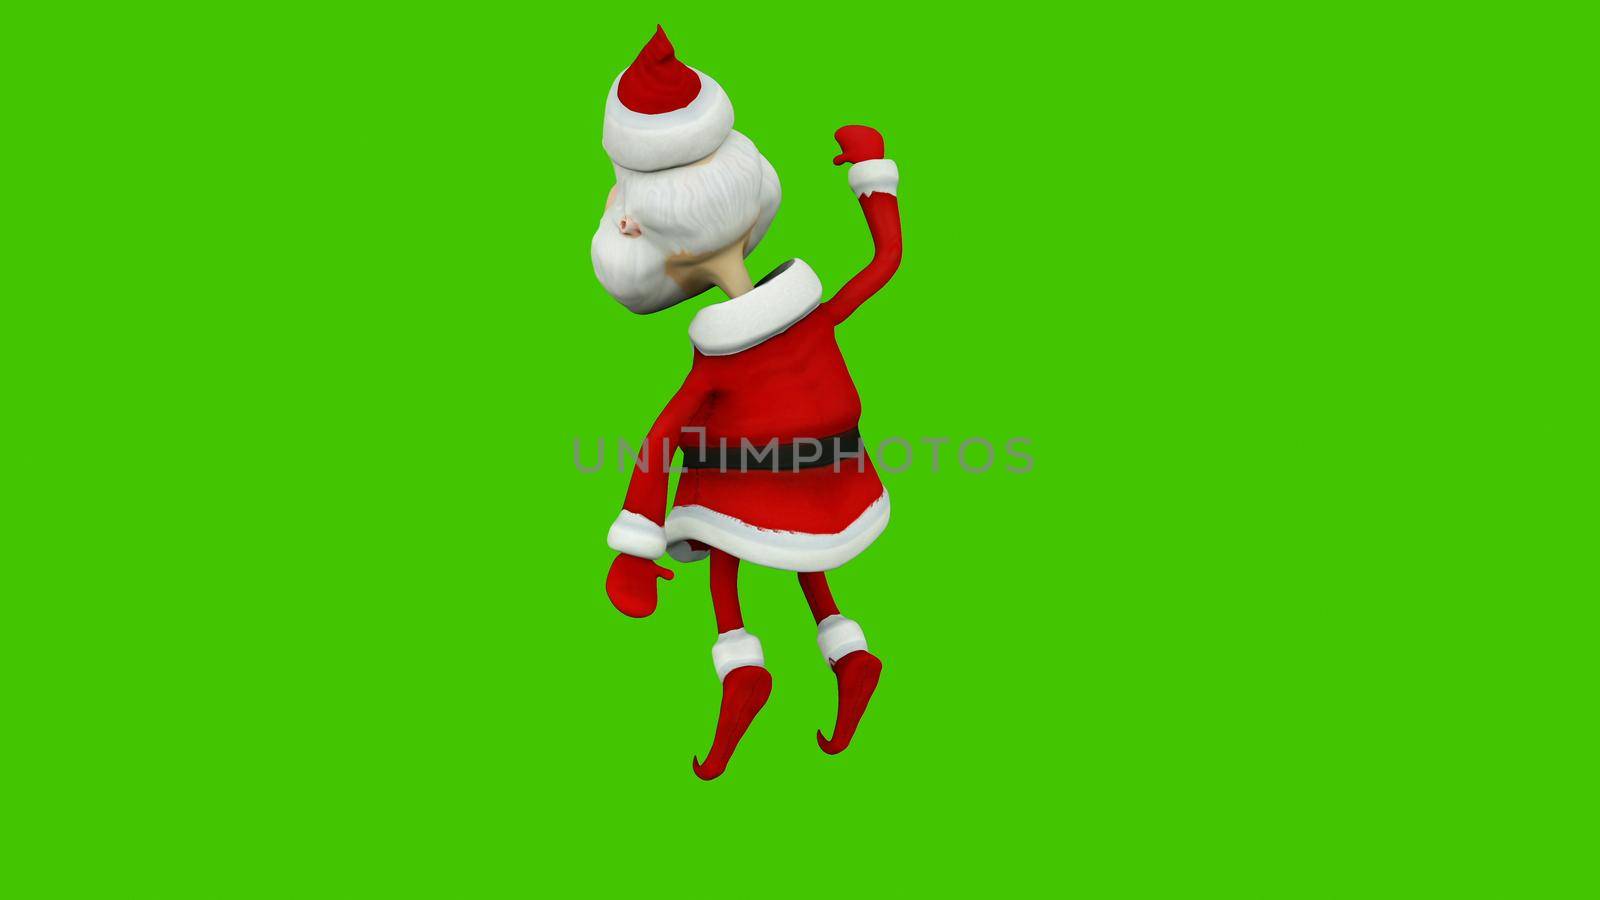 The dance of a cheerful Santa Claus. The Concept of Christmas.